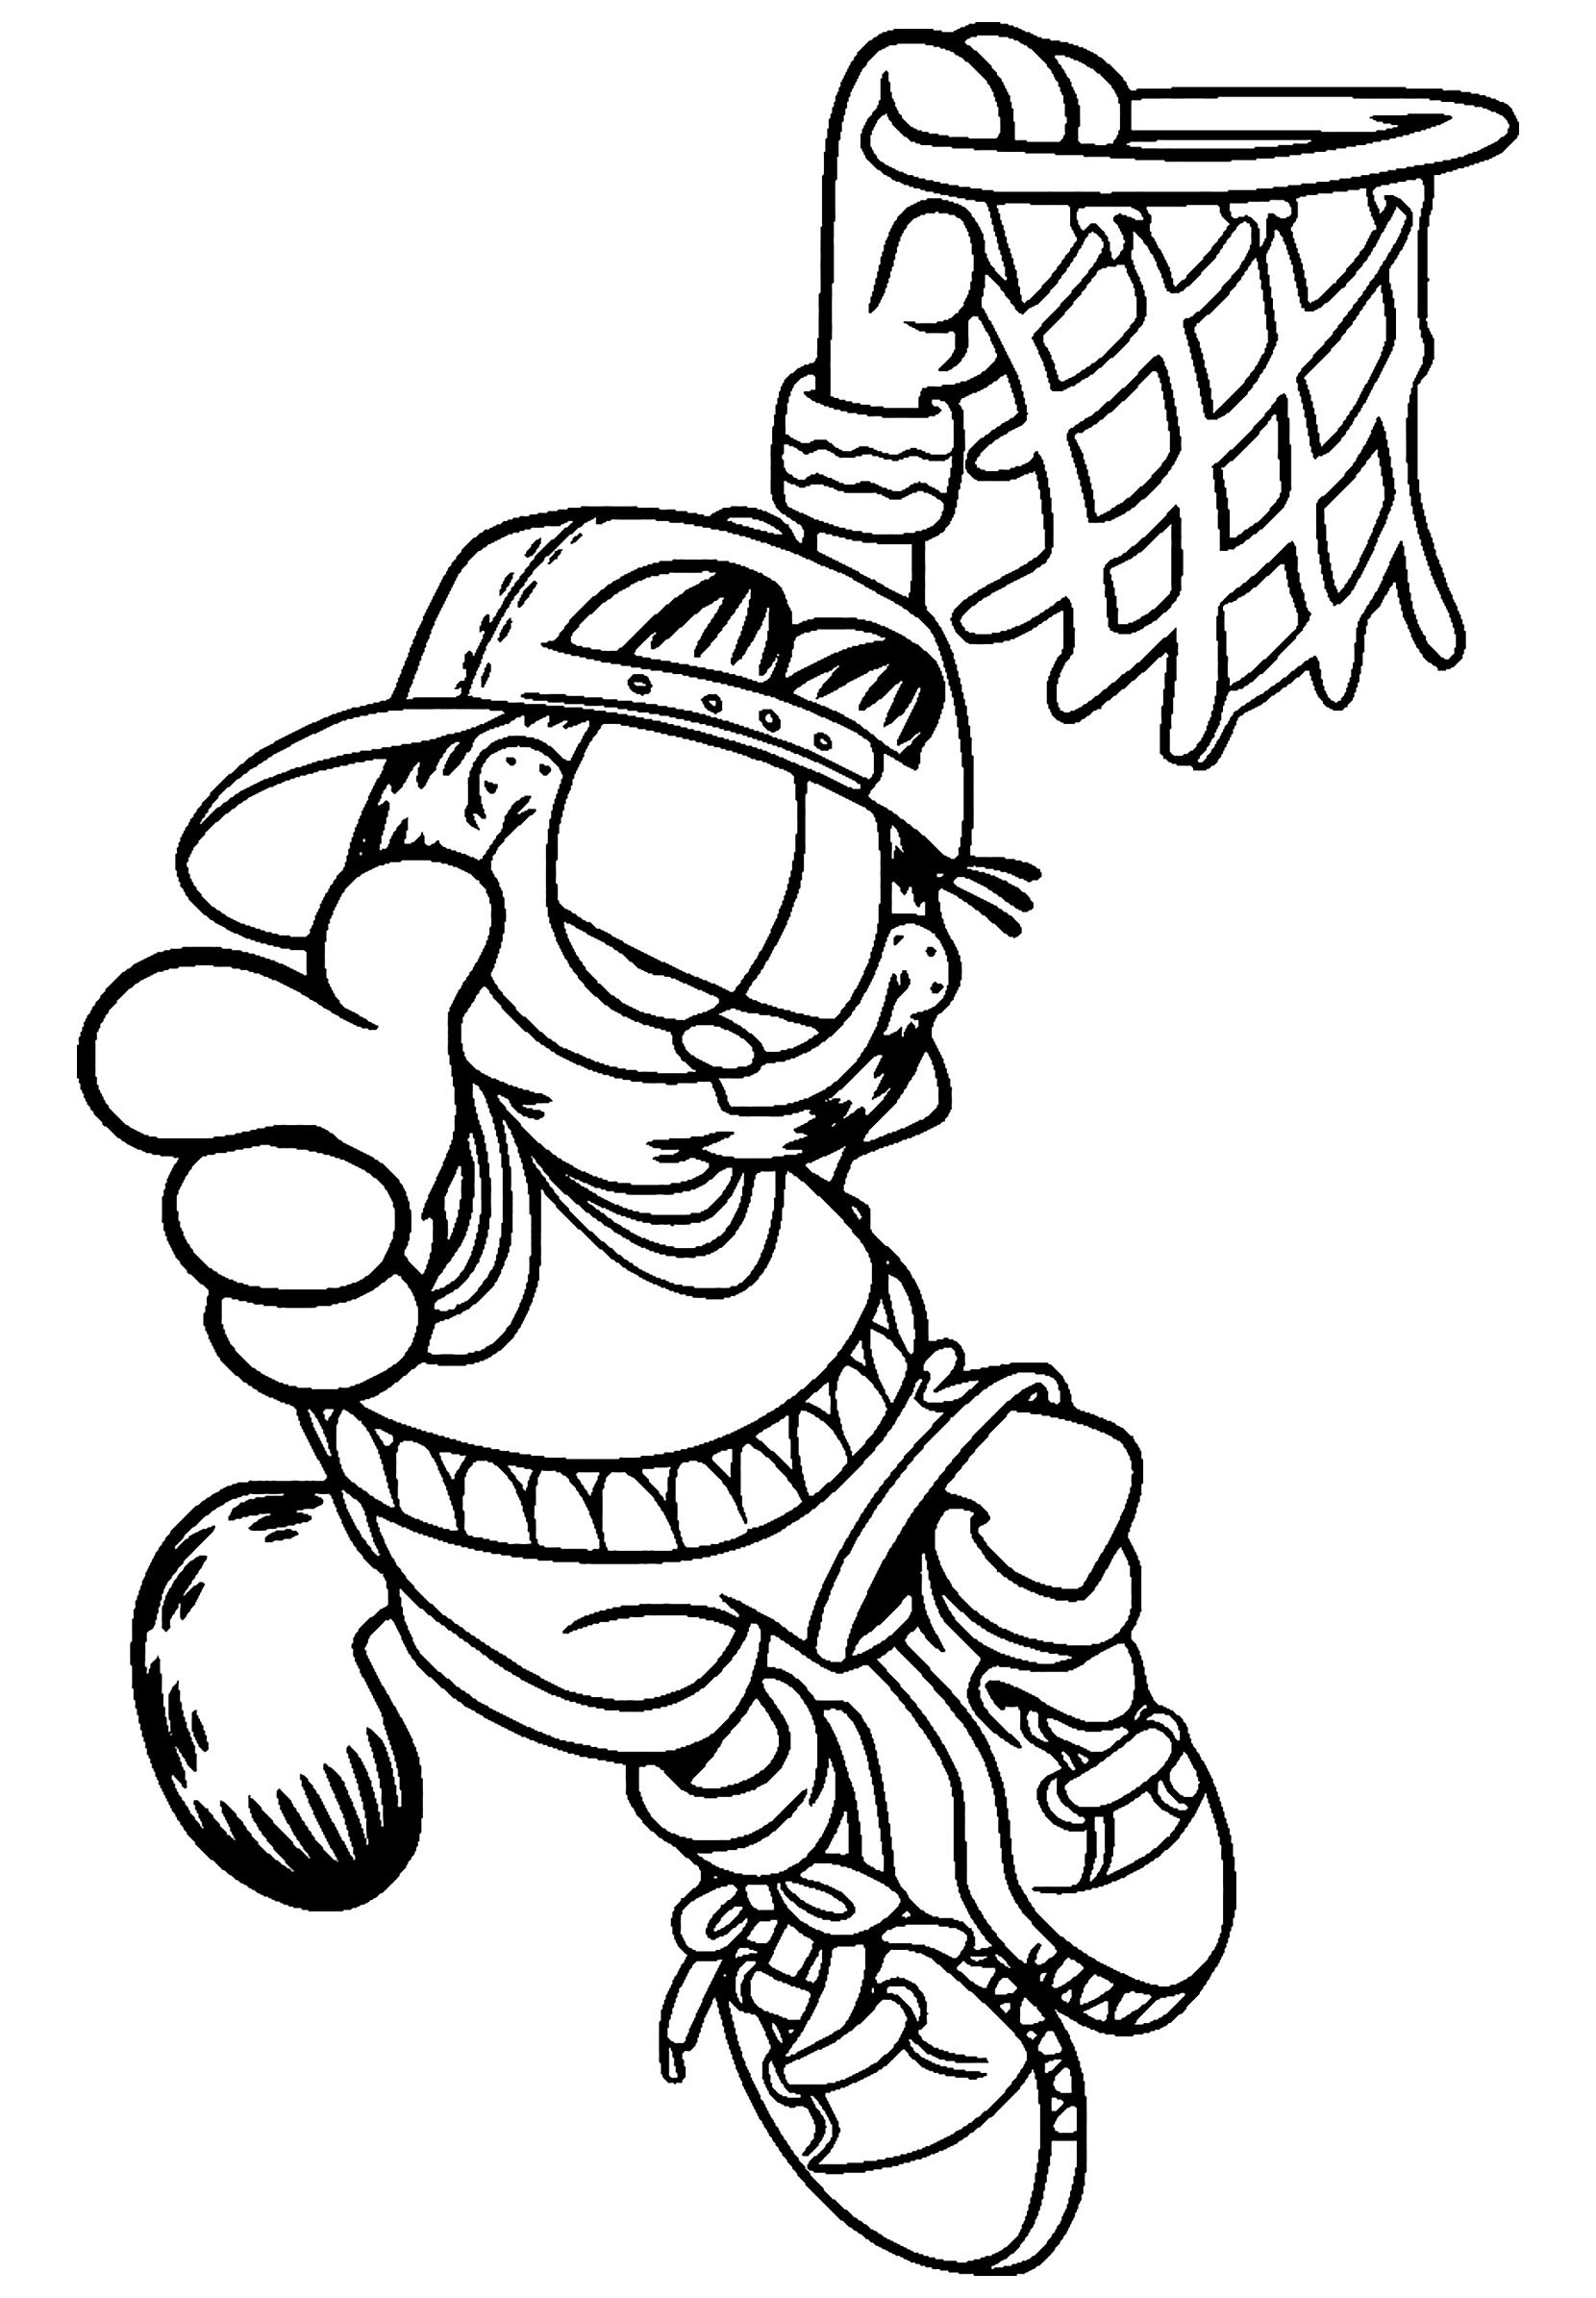 Coloring-Pages-Kids
 Garfield to Garfield Kids Coloring Pages